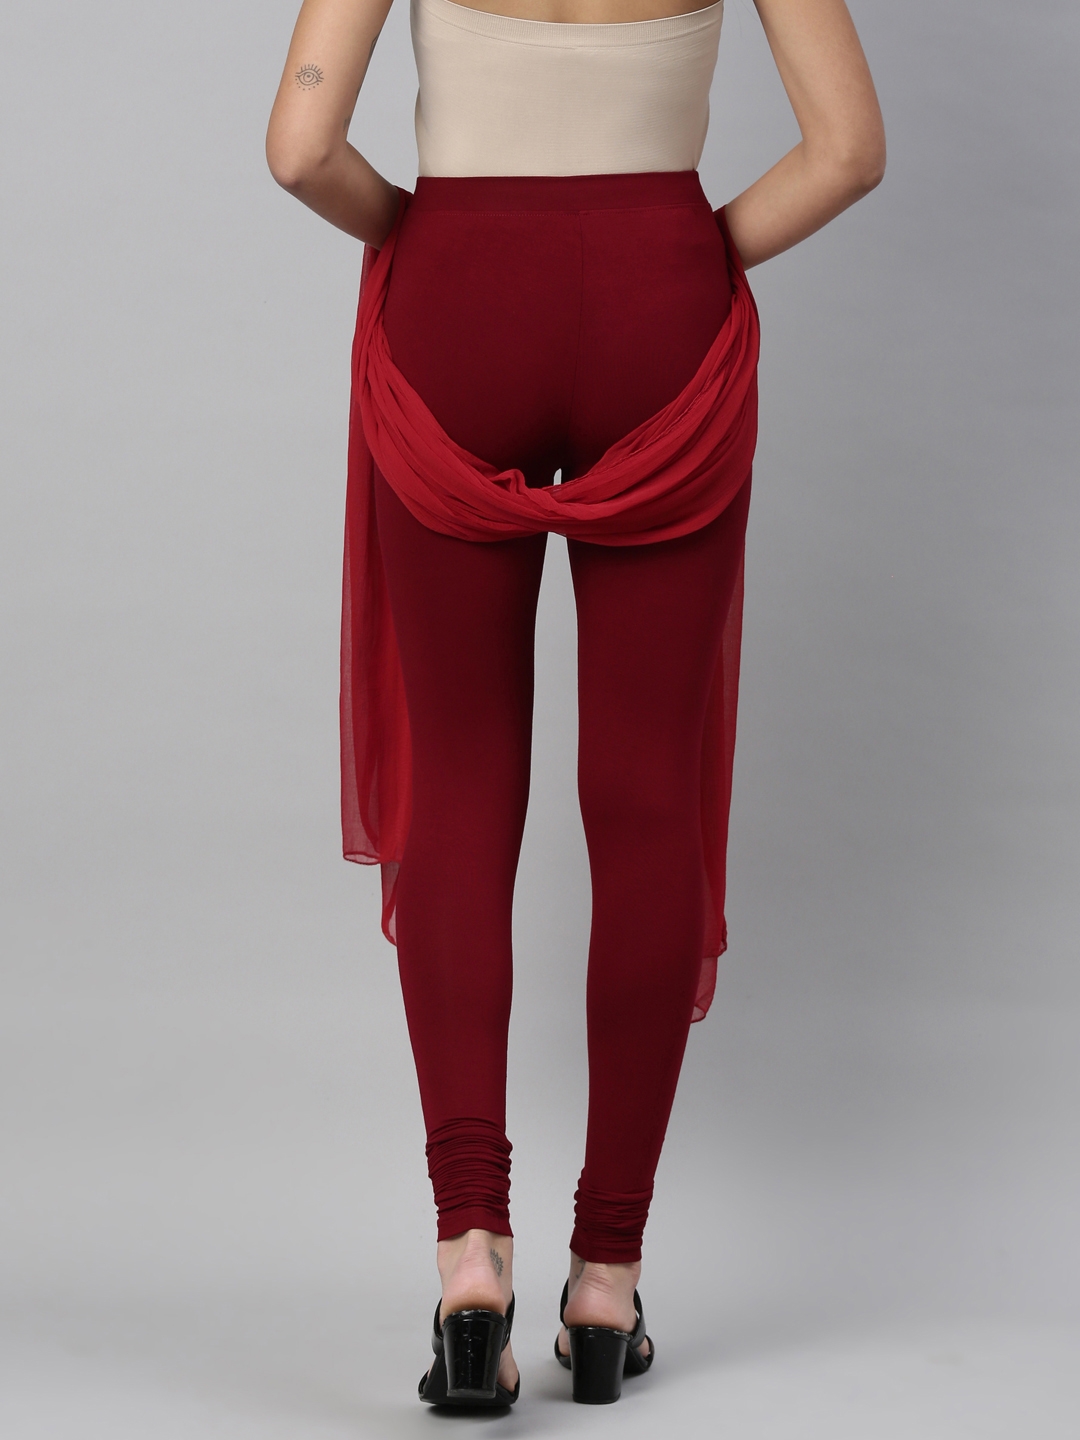 Twinbirds Cherry Berry Red Solid Ankle Legging